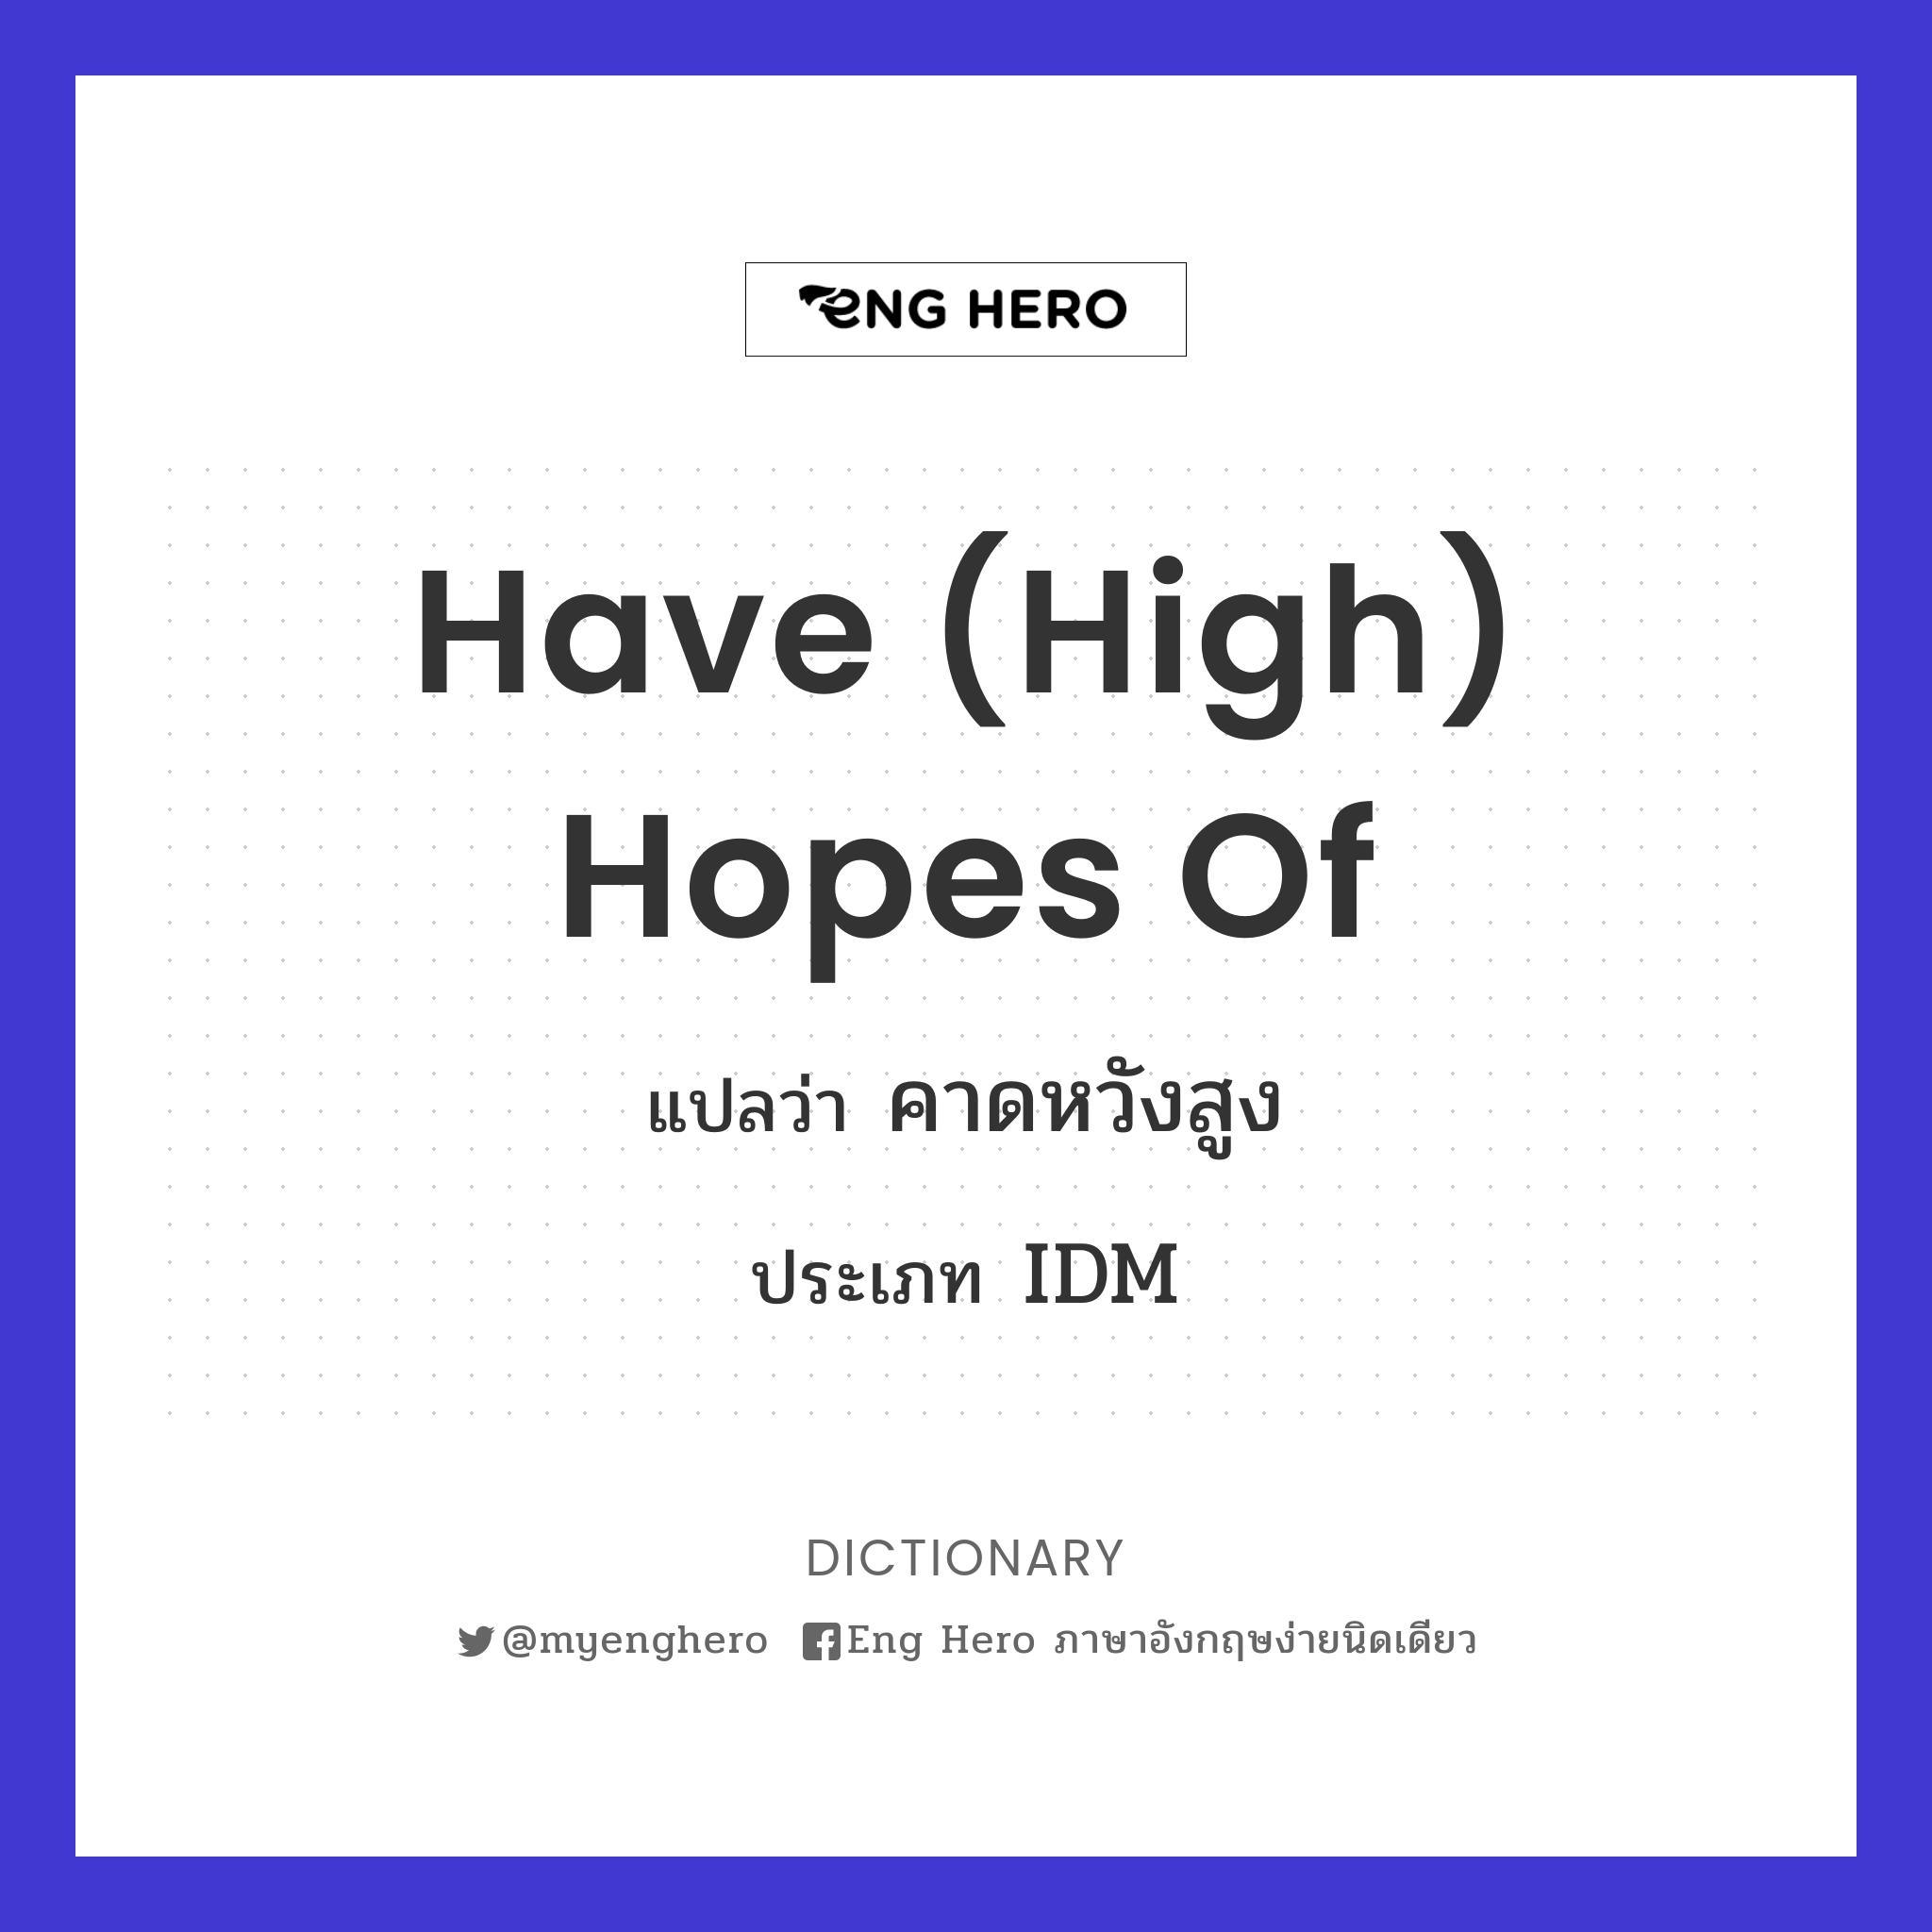 have (high) hopes of